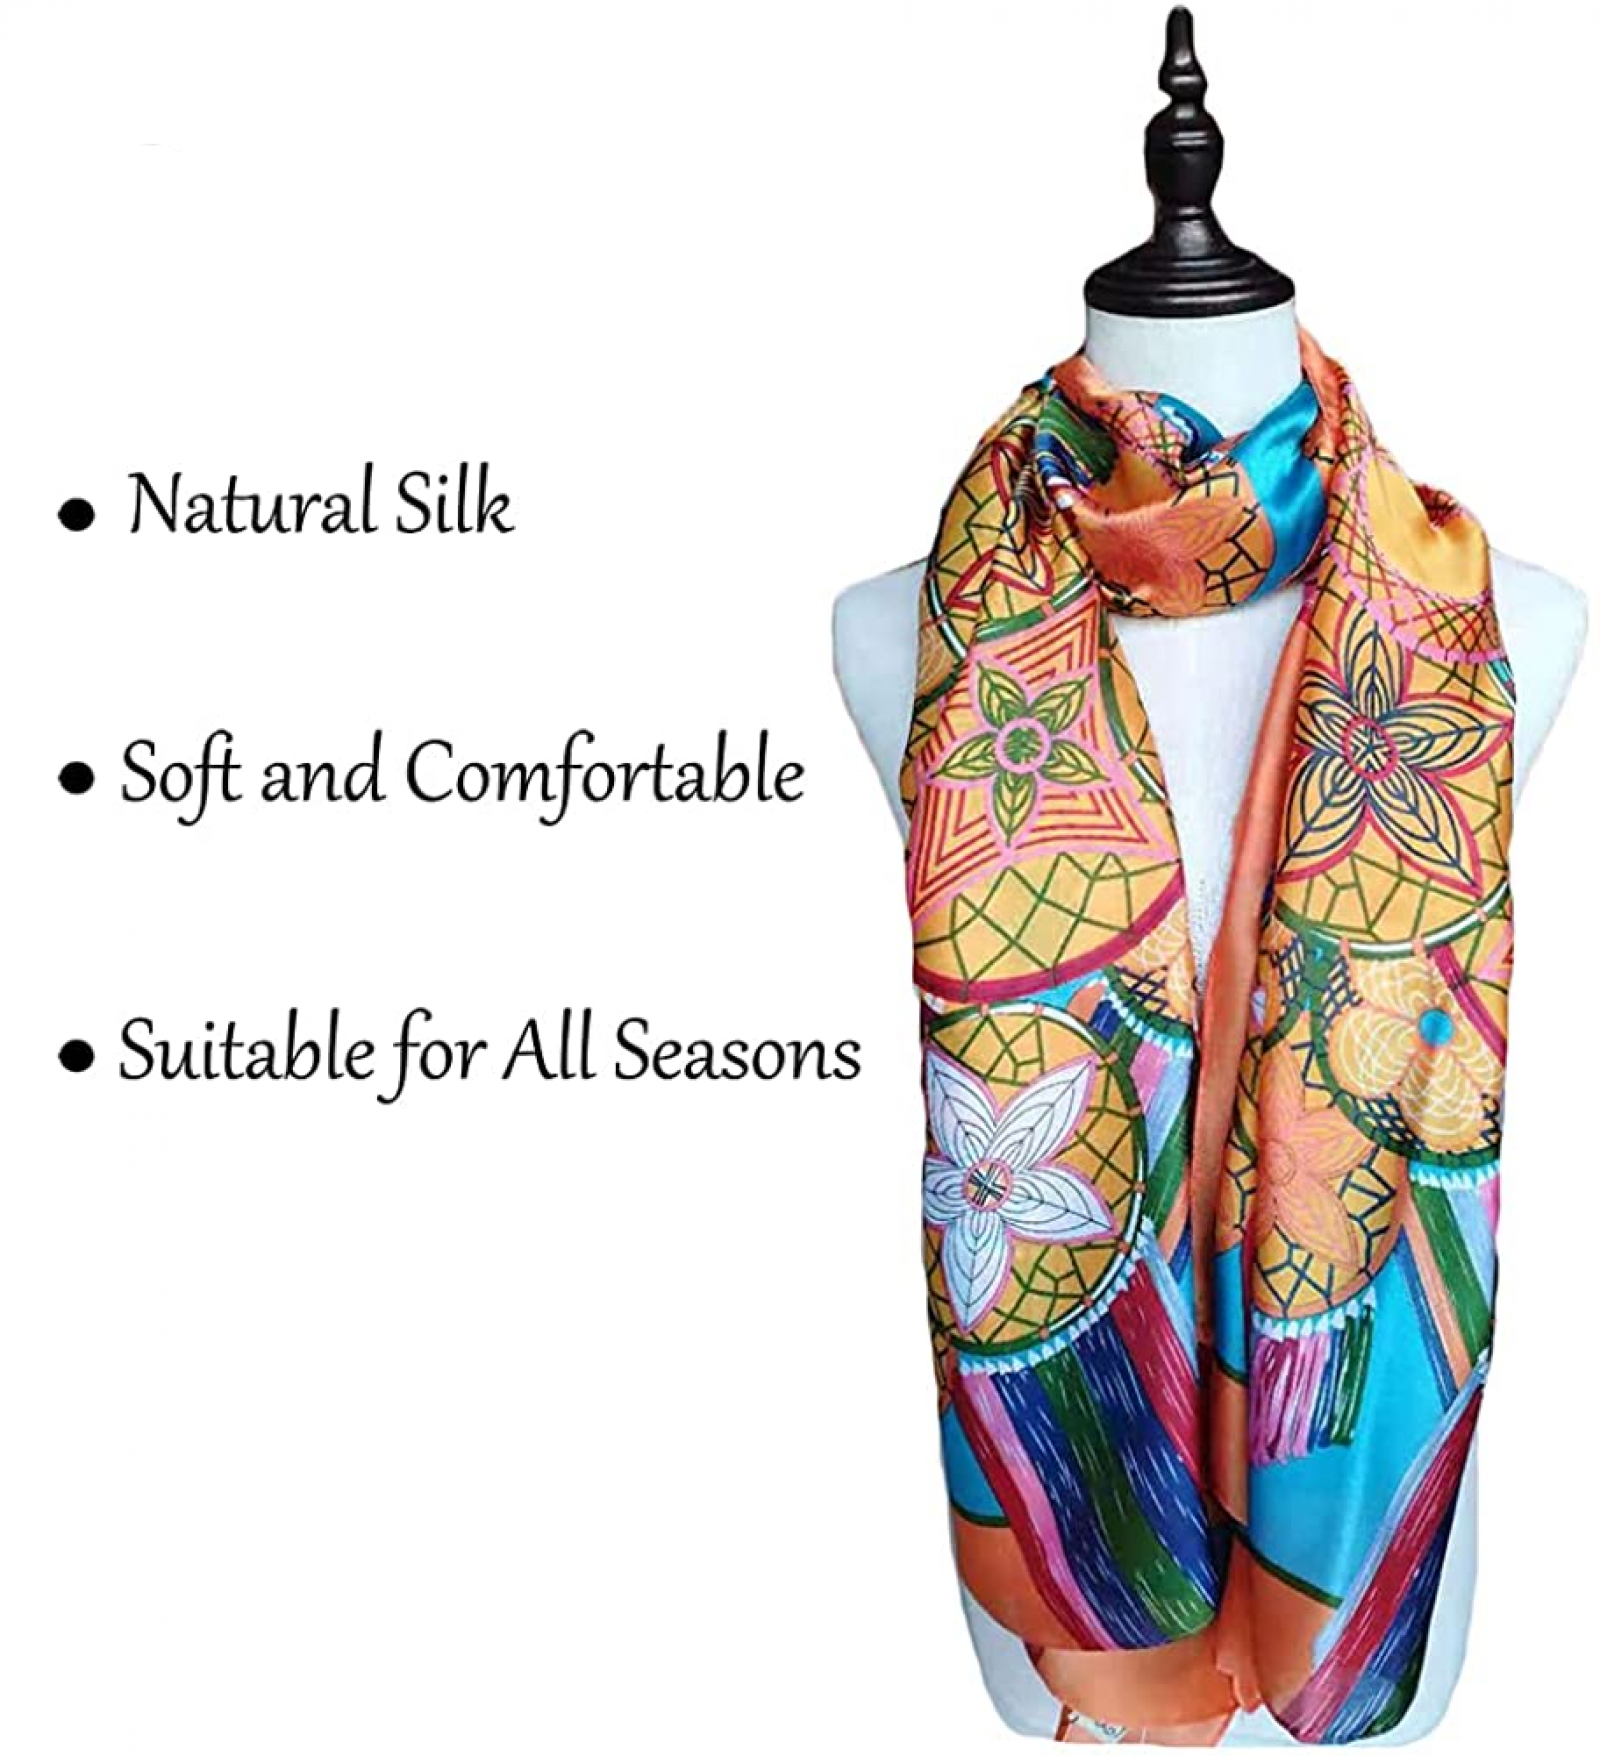 Designer Satin Silk Scarf For Purse For Women Lightweight Square And Medium  Headband Shawl With Mulberry Twilly Character Lette From Bvkdx, $20.75